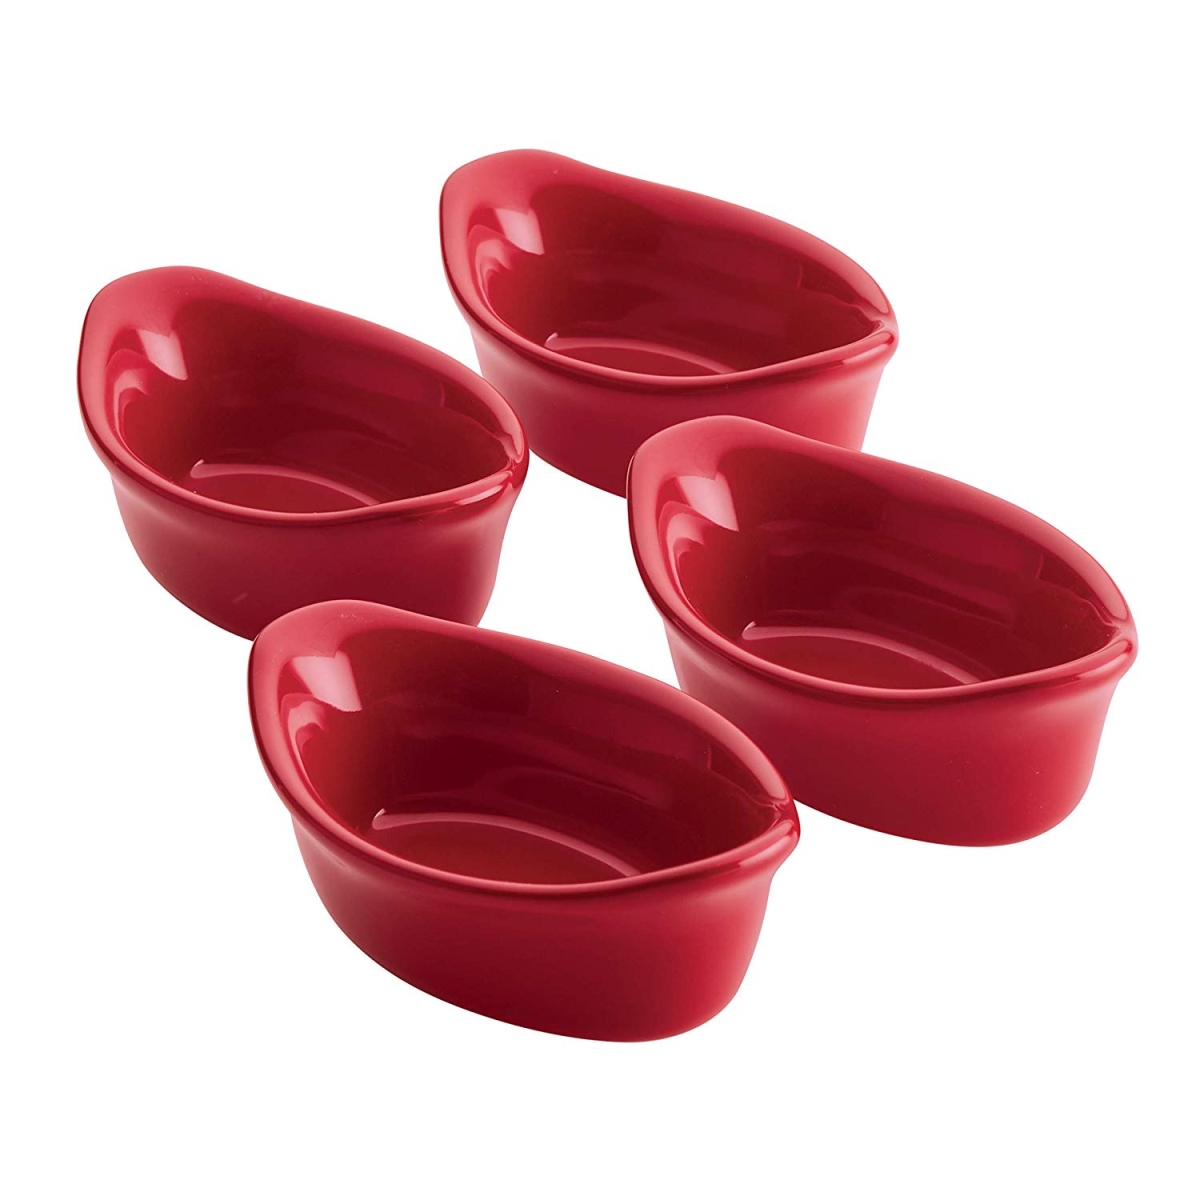 47861 Ceramics Oval Dipping Cups, Red - 4 Piece